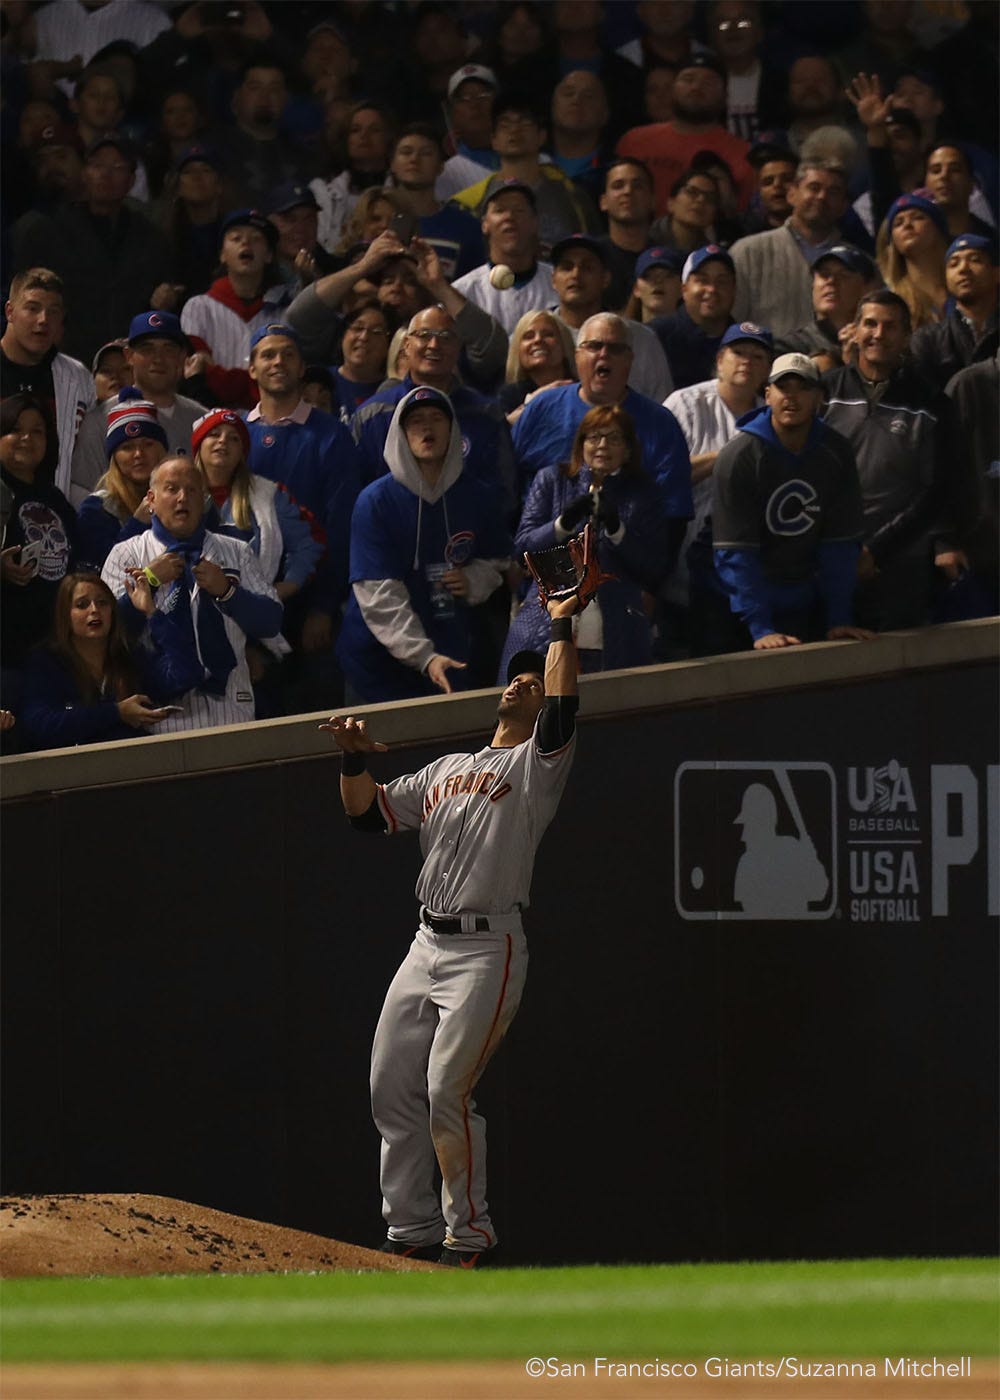 Angel Pagan catches a foul ball hit by Anthony Rizzo in the second inning.